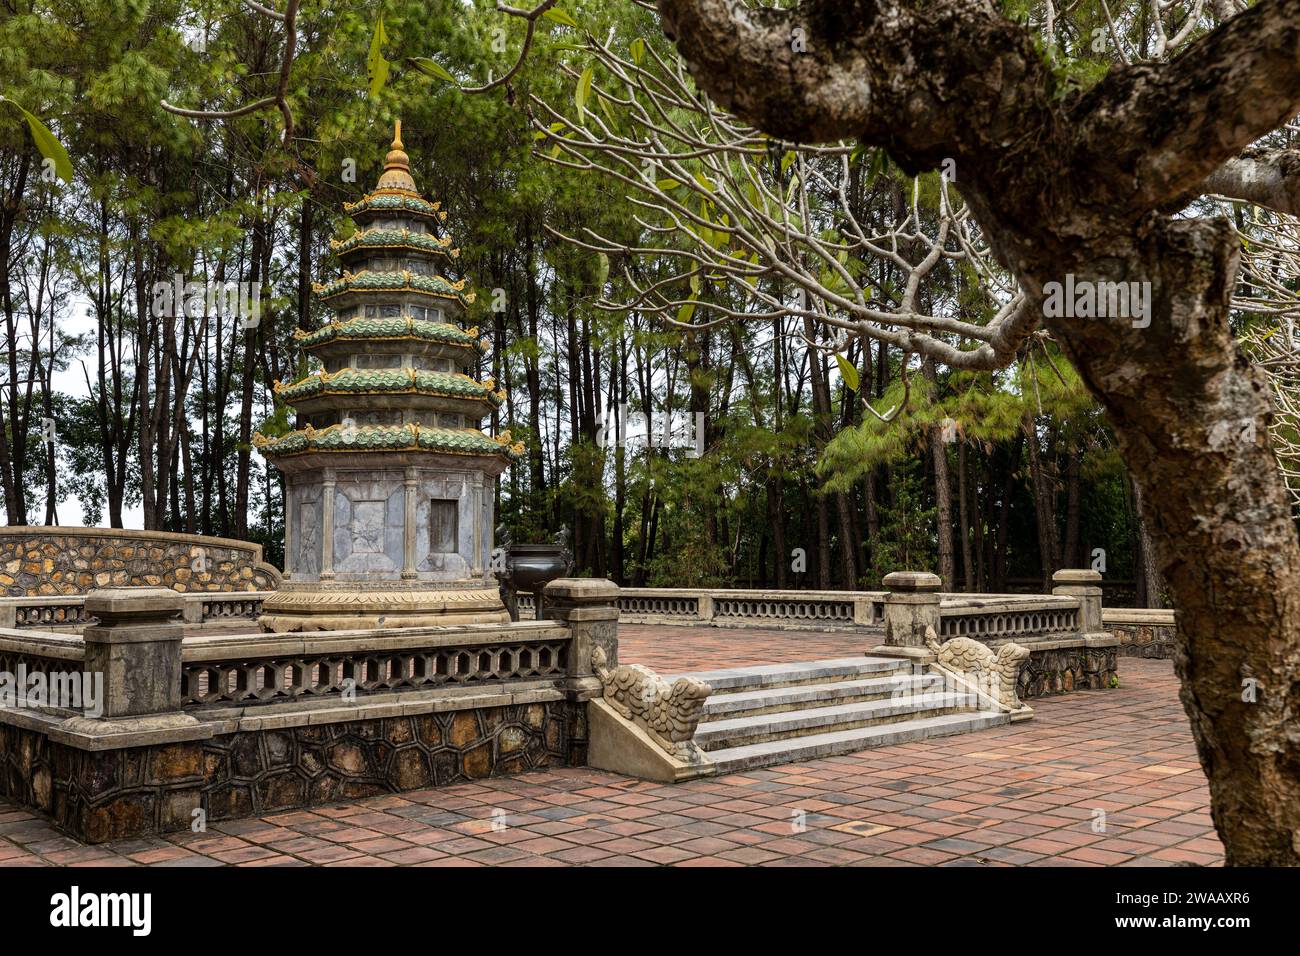 The old Pagoda of Hue in Vietnam Stock Photo